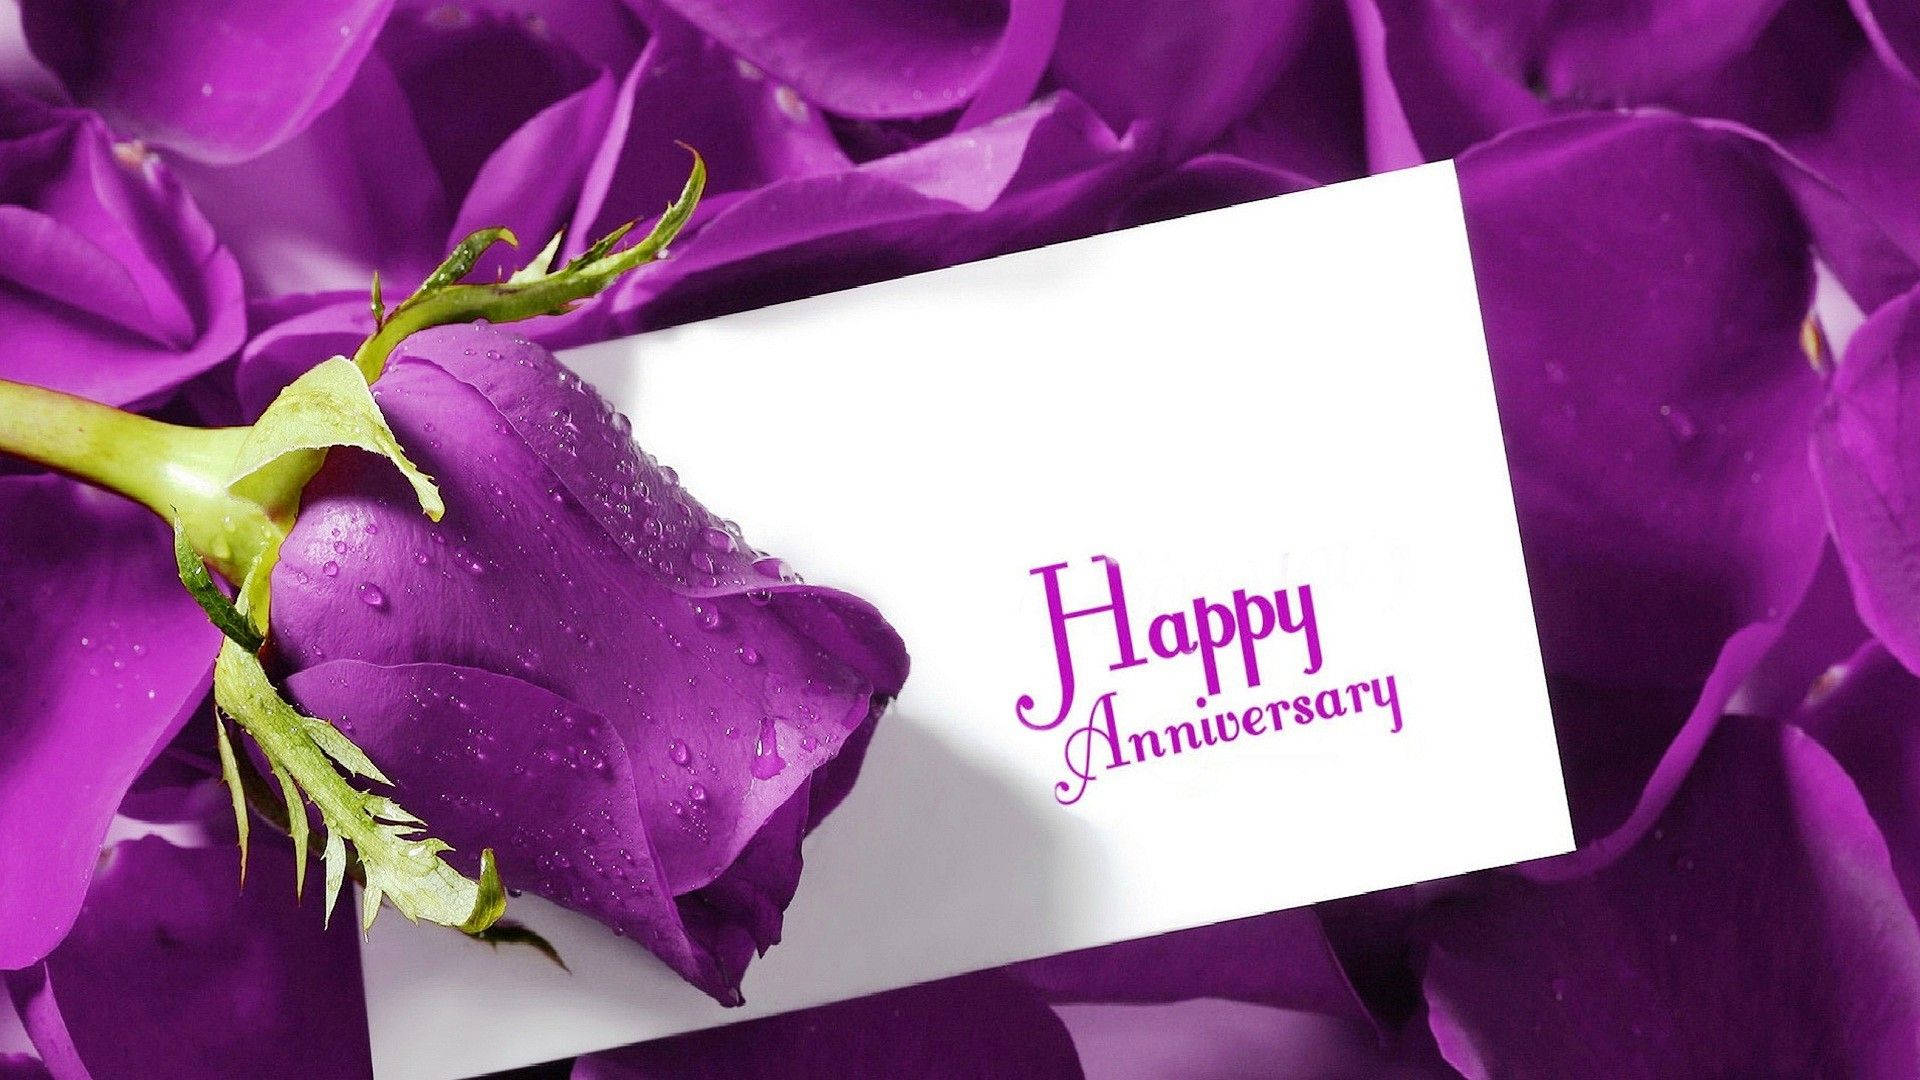 Happy Anniversary Letter With Purple Rose Background